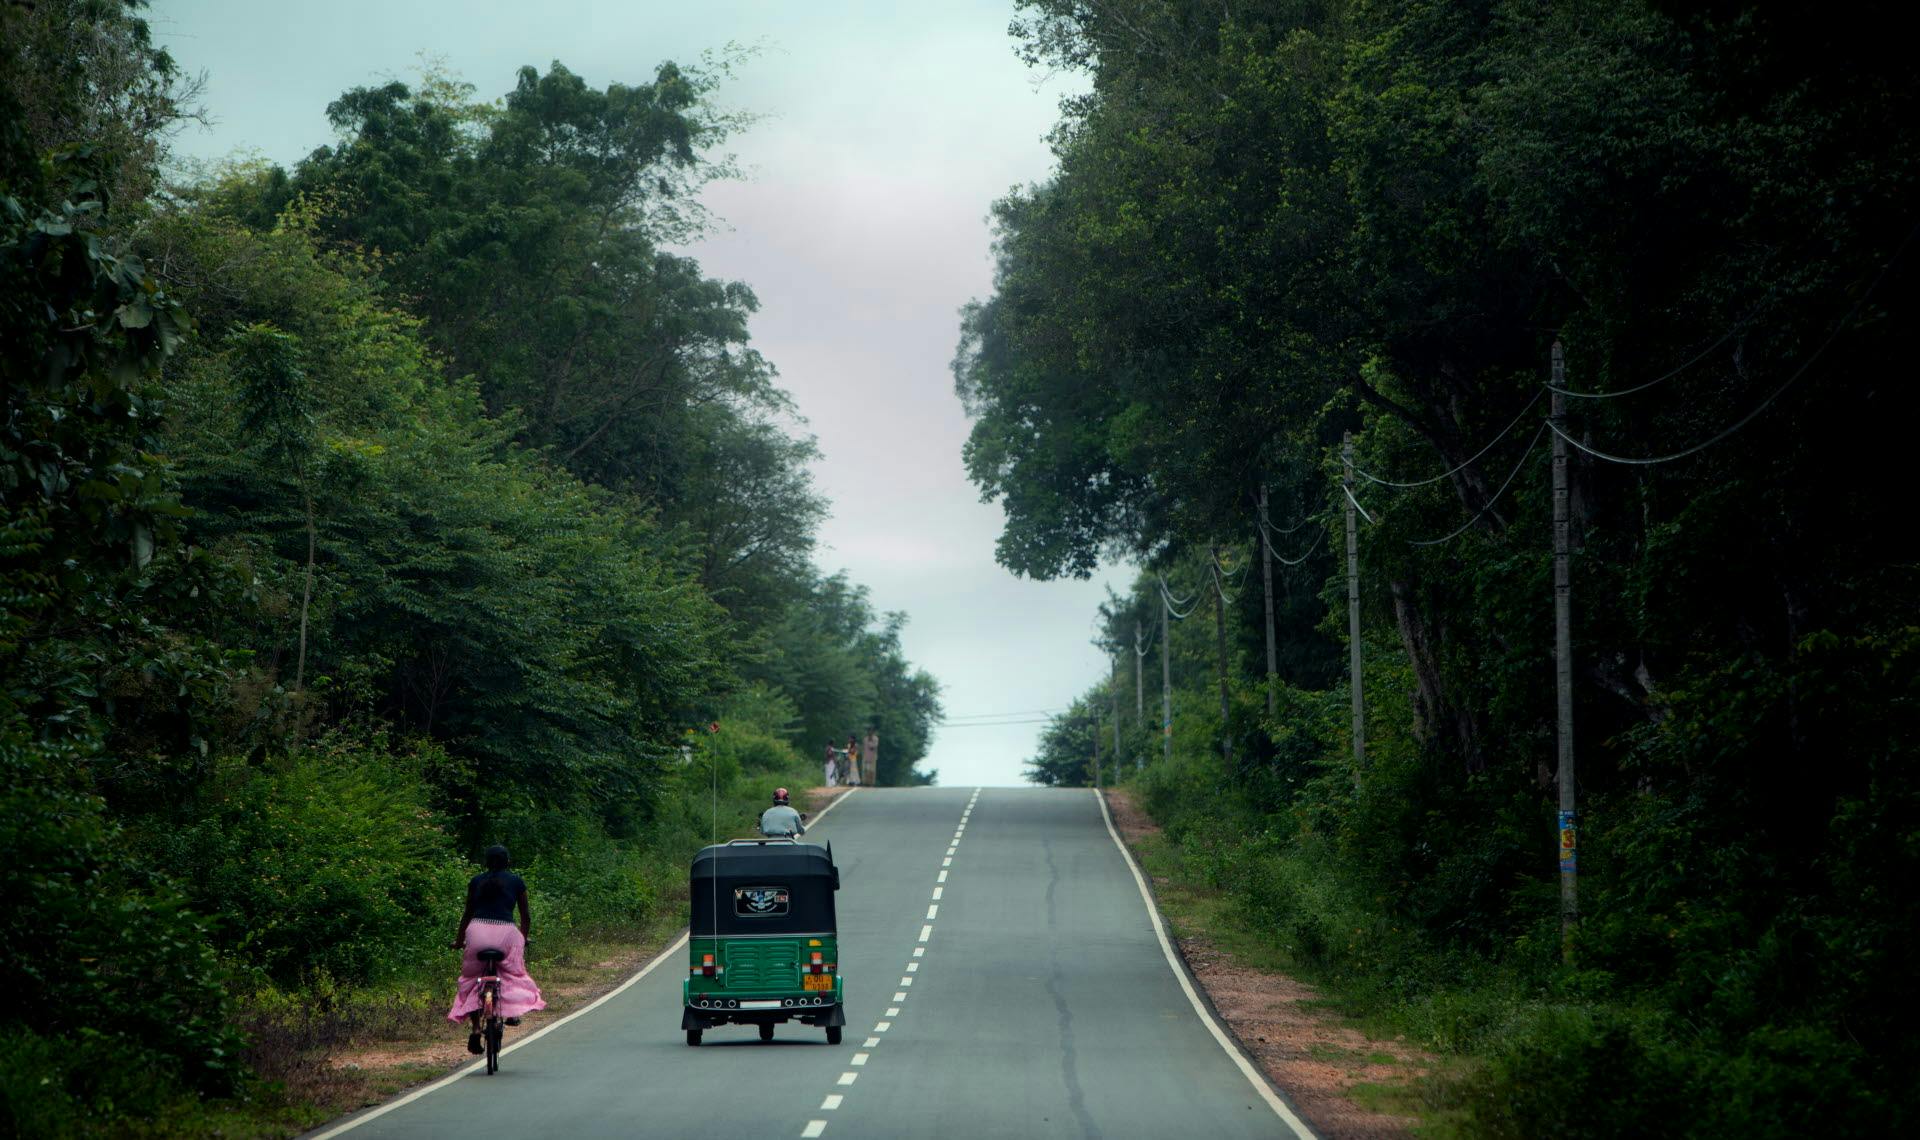 A view of a road with threes surrounding it.